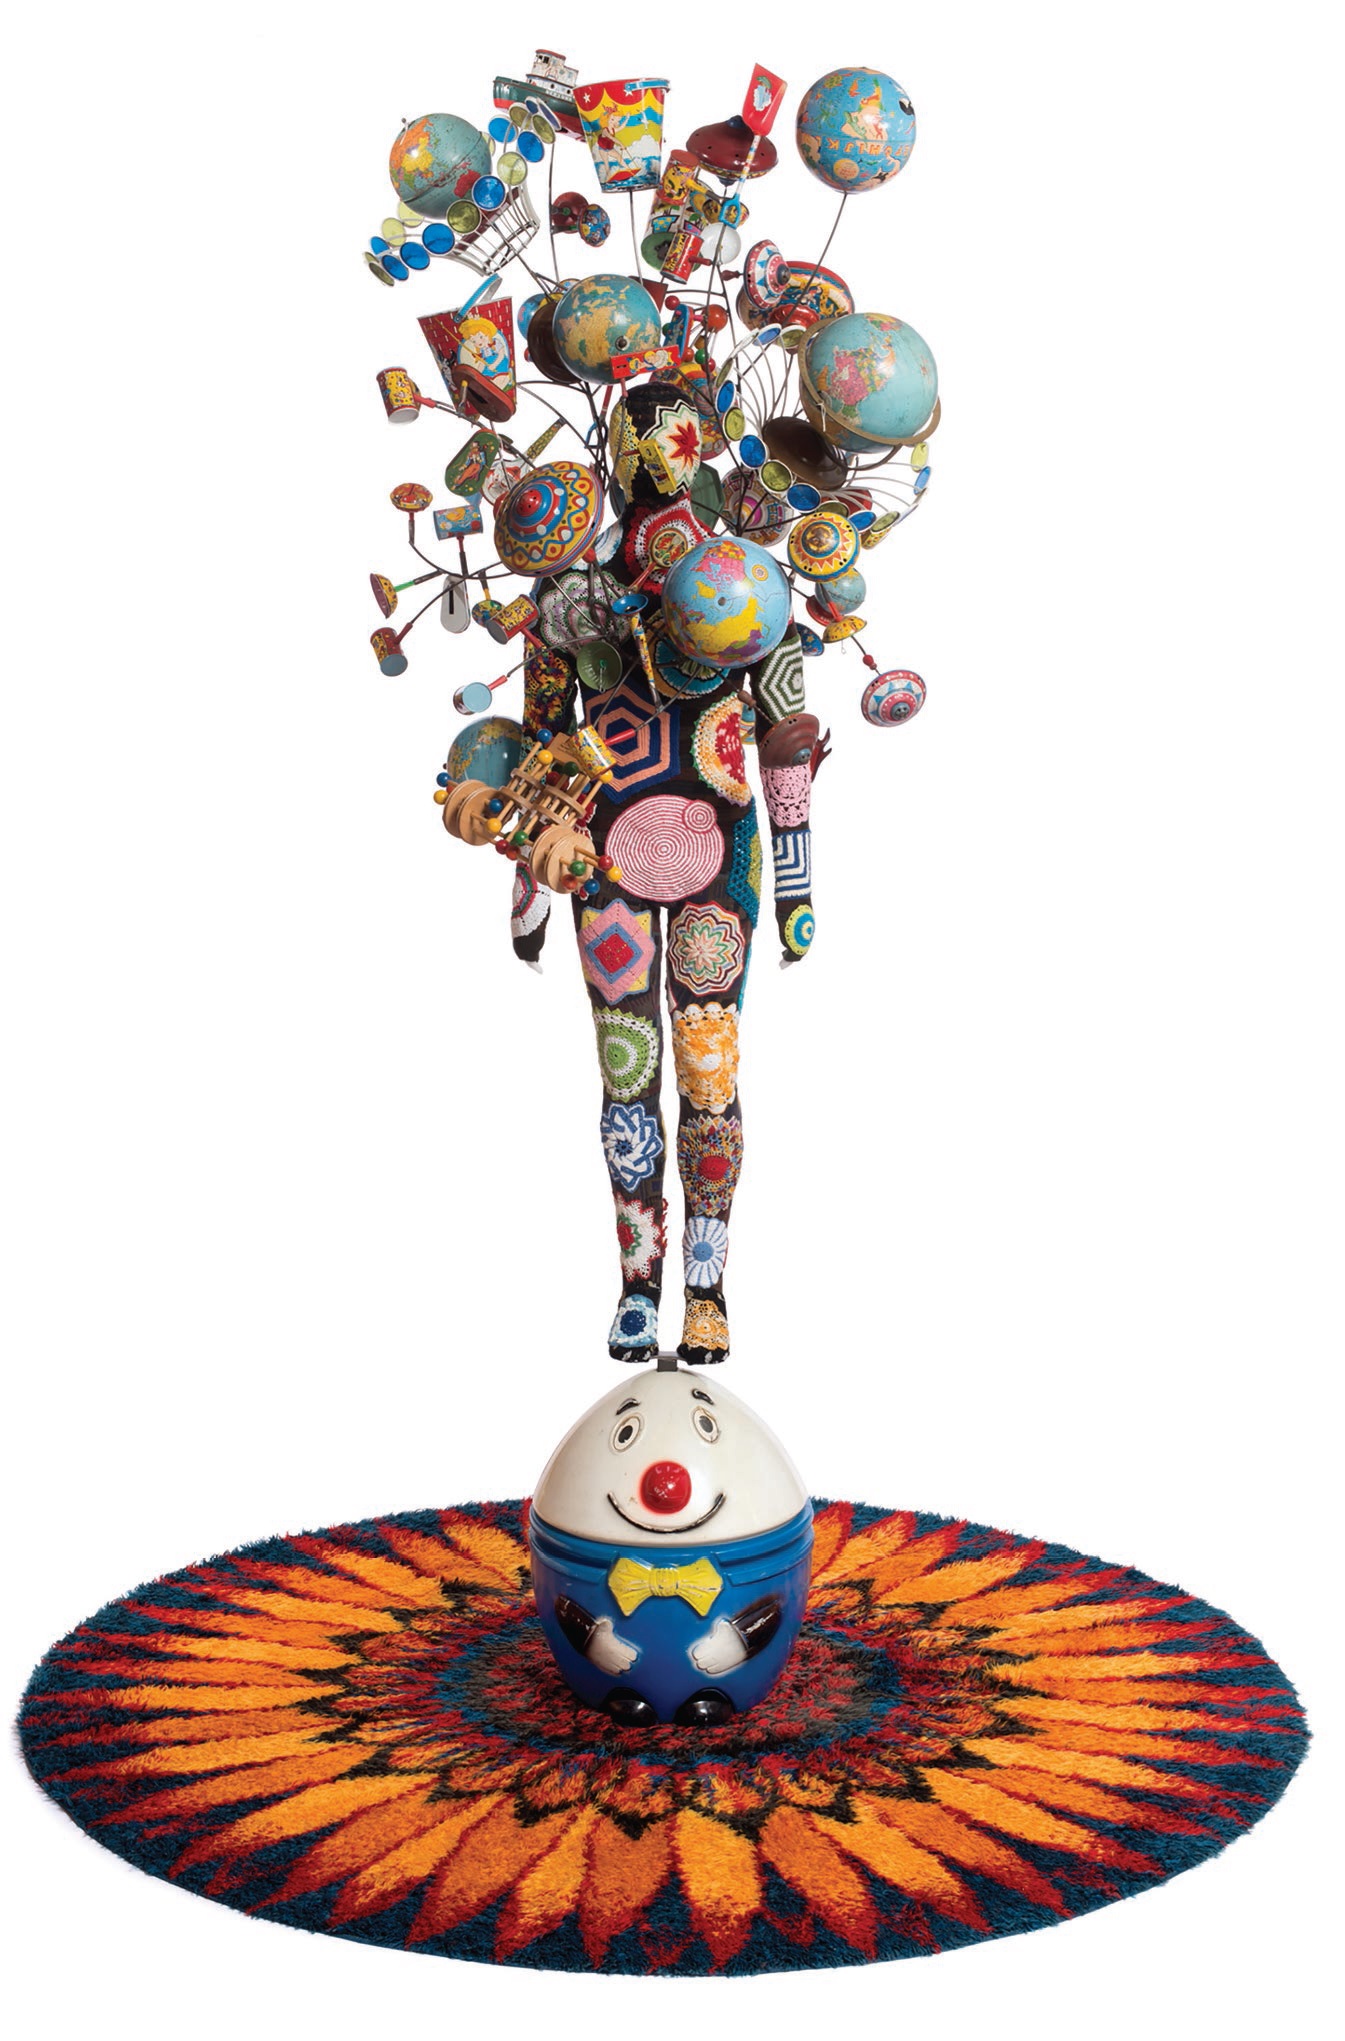 “Soundsuit” (2012, mixed media including embroidery, fabric, vintage toys, rug and mannequin), 127 inches by 98 inches by 93 inches; rug 98 inches by 92 inches